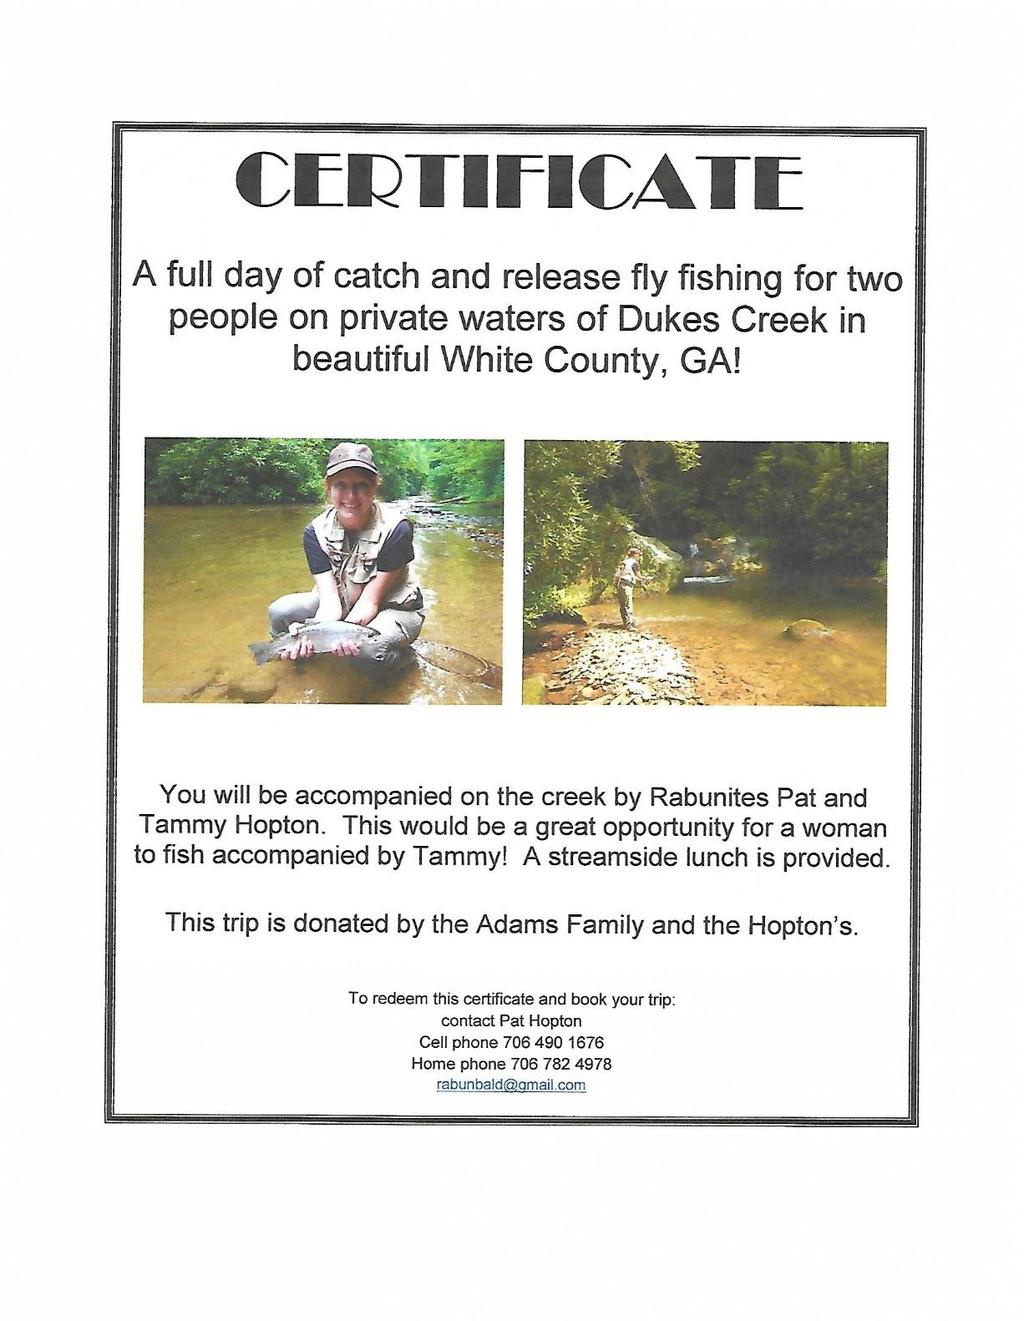 Full Day of Catch and Release Fly Fishing for Two on the Private Waters of Dukes Creek in beautiful